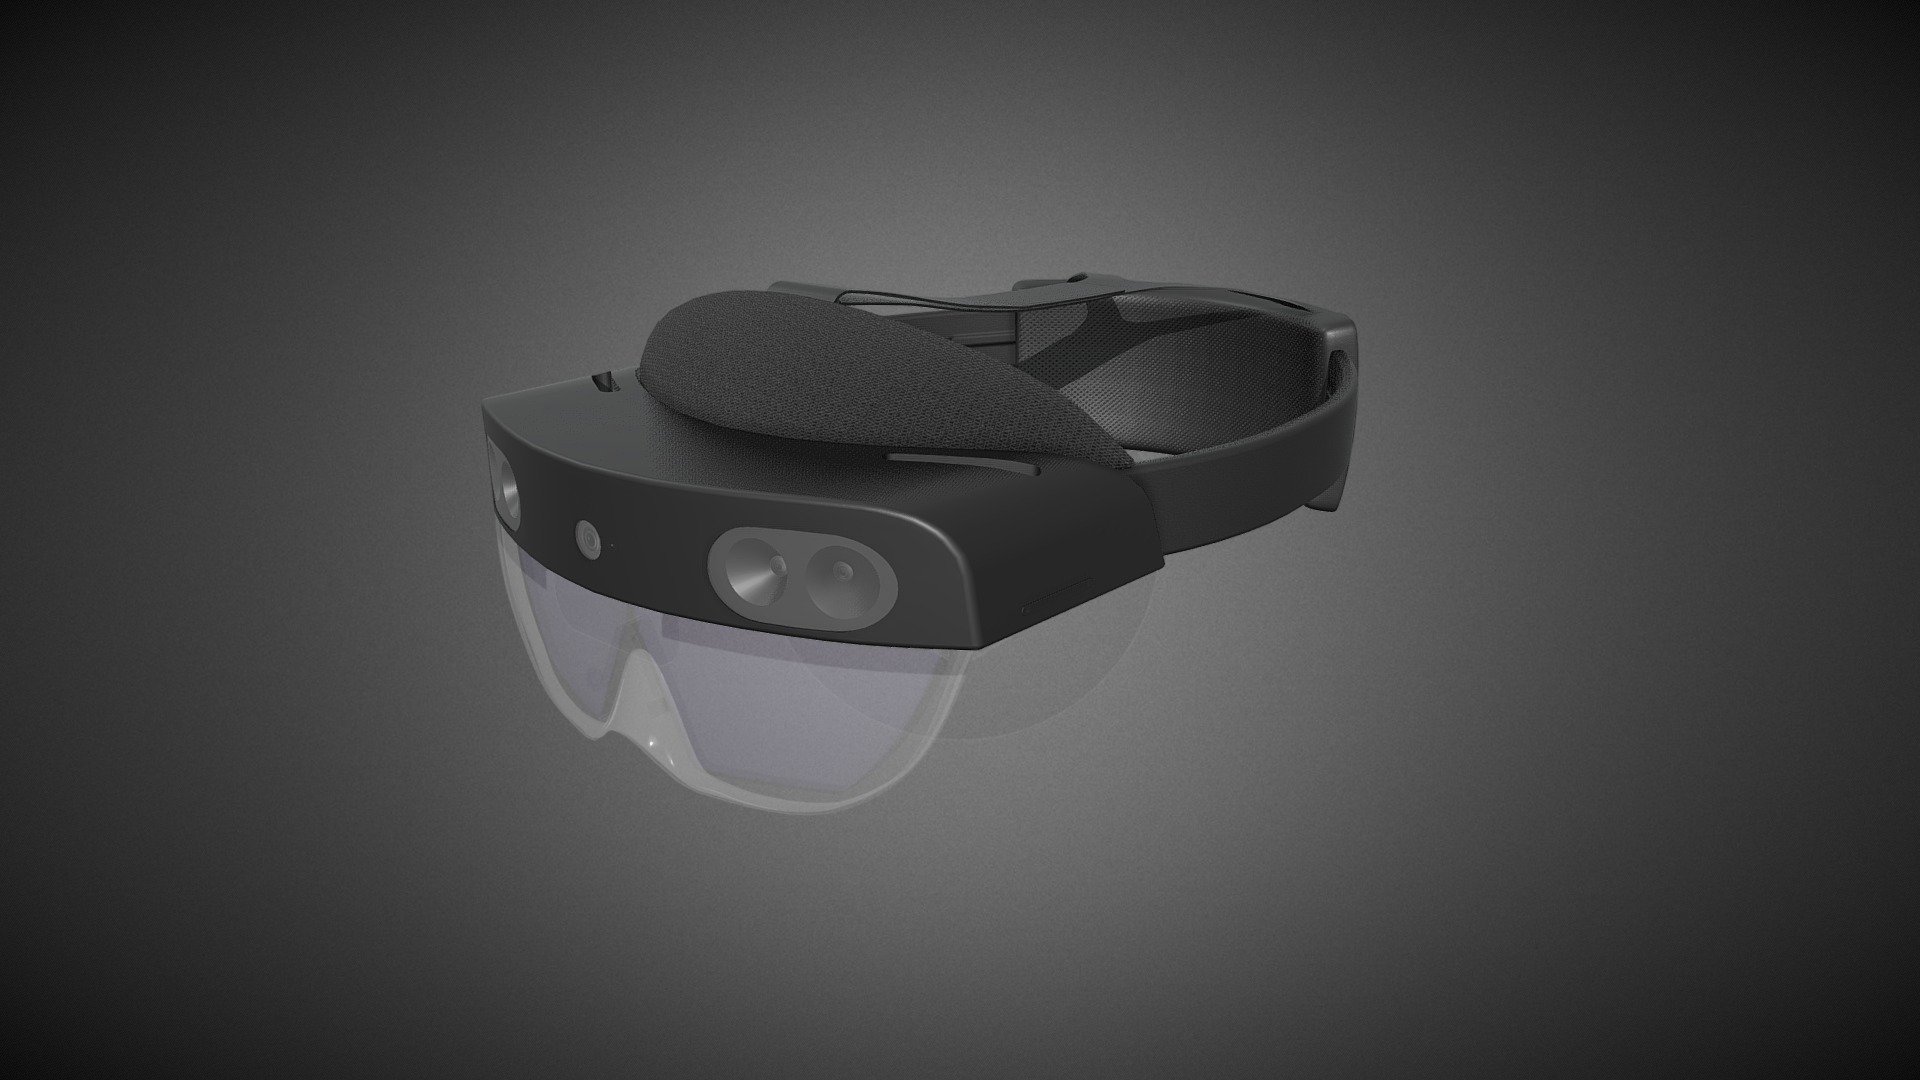 Hololens contains low poly 3D models of MR Device with High Quality textures to fill up your game environment. The assets are VR-Ready and game ready.

Total Polygons - 11695

Total Tris - 23369

These models are delivered without any brandings or logos attached. The End users/Buyers are solely responsible for ensuring compliance with any branding or trademark requirements applicable to their specific projects.

For Unity3d (Built-in, URP, HDRP) Ready Assets visit our Unity Asset Store Page

Enjoy and please rate the asset!

Contact us on for AR/VR related queries and development support

Gmail - designer@devdensolutions.com

Website

Instagram

Facebook

Linkedin

Youtube

Buy Pizza - Hololens 2 - Buy Royalty Free 3D model by Devden 3d model